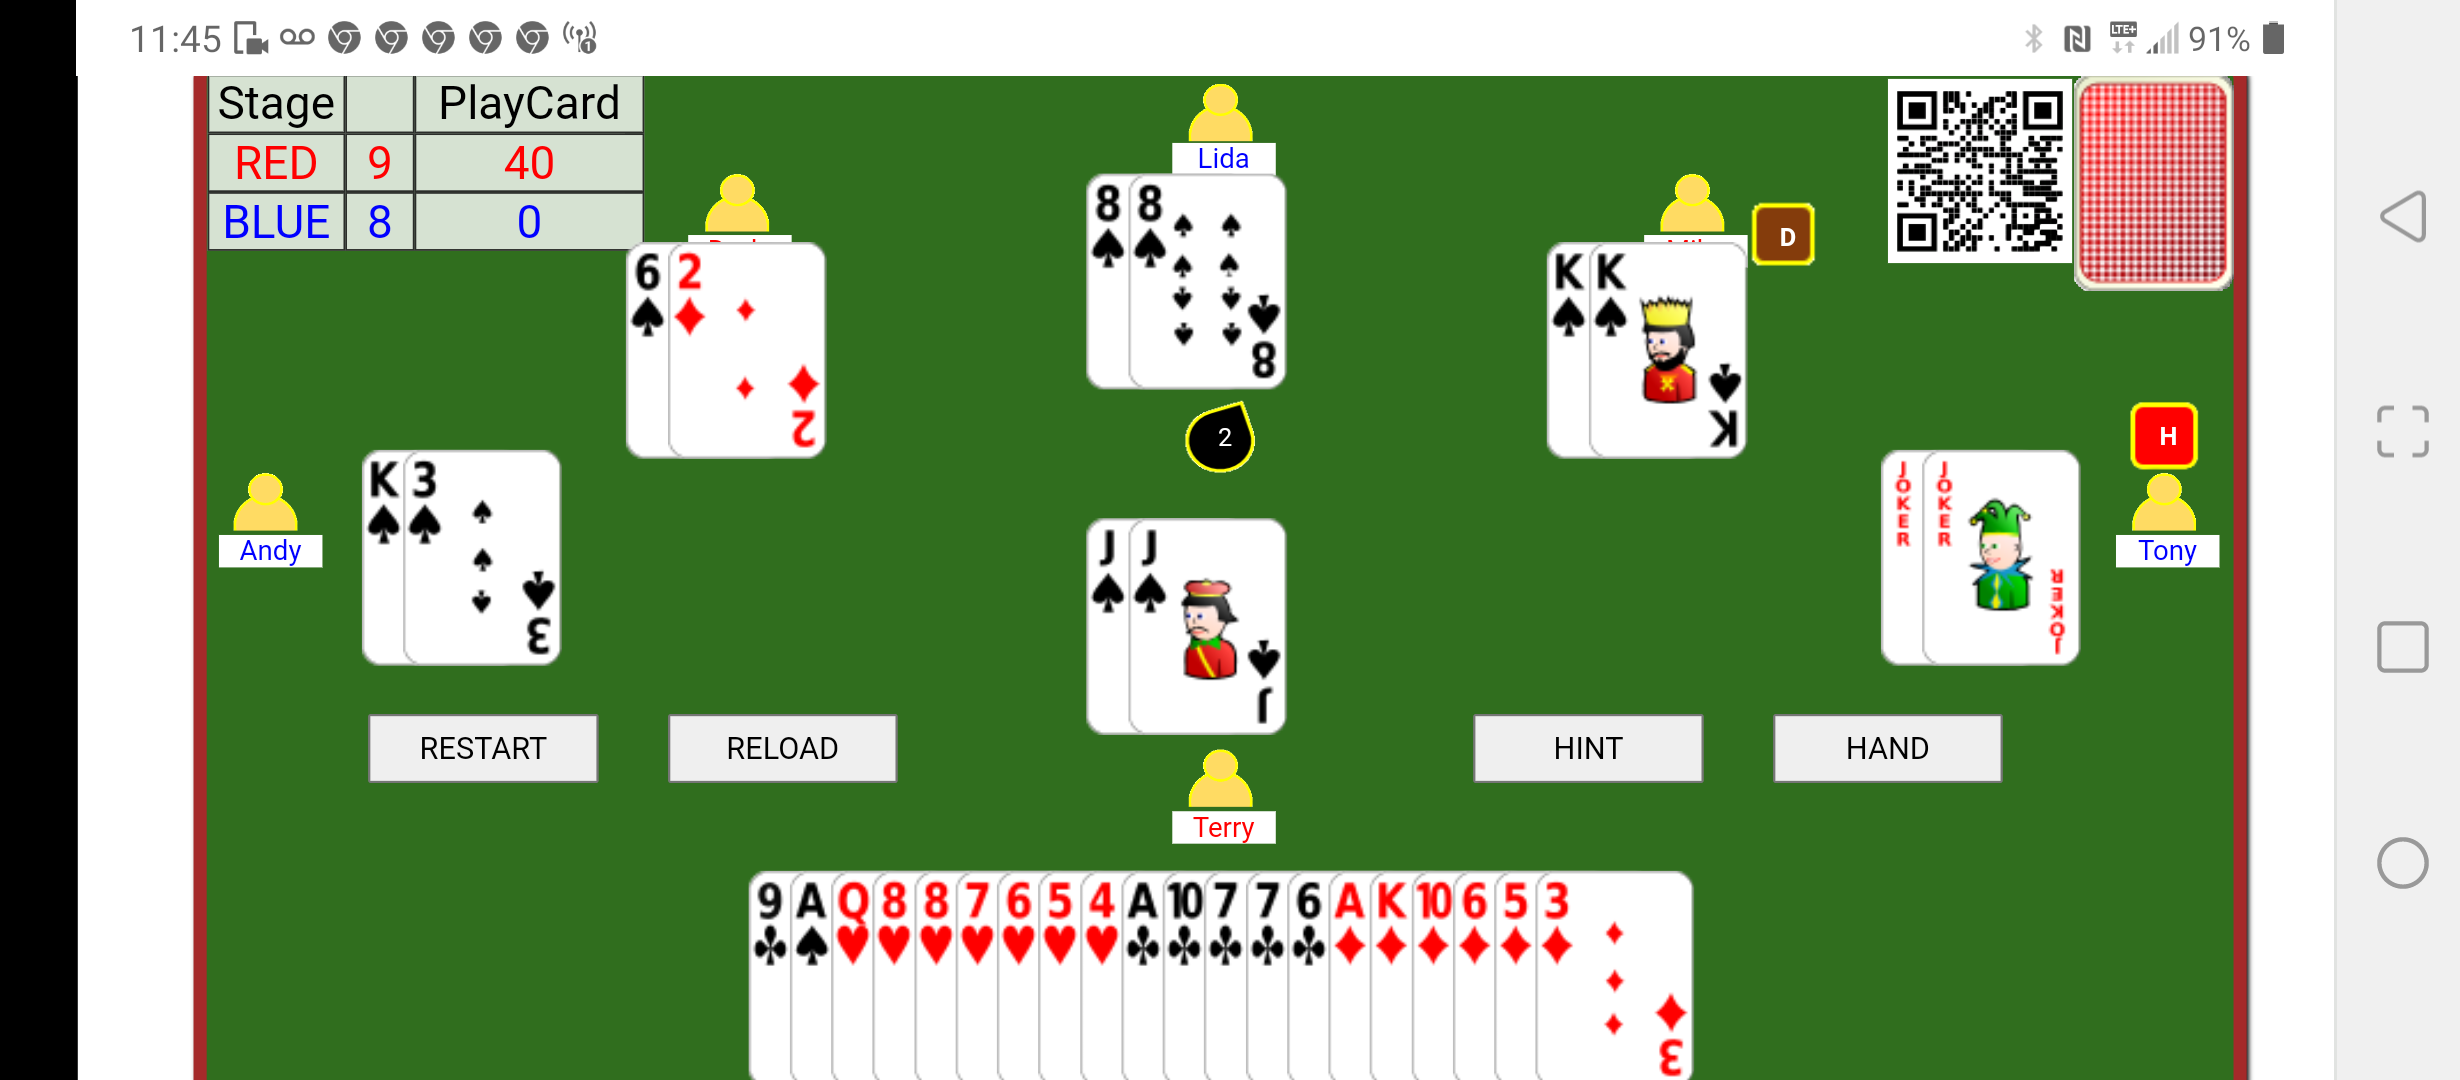 html5 tractor card game Screenshot_20220120-11452612.png